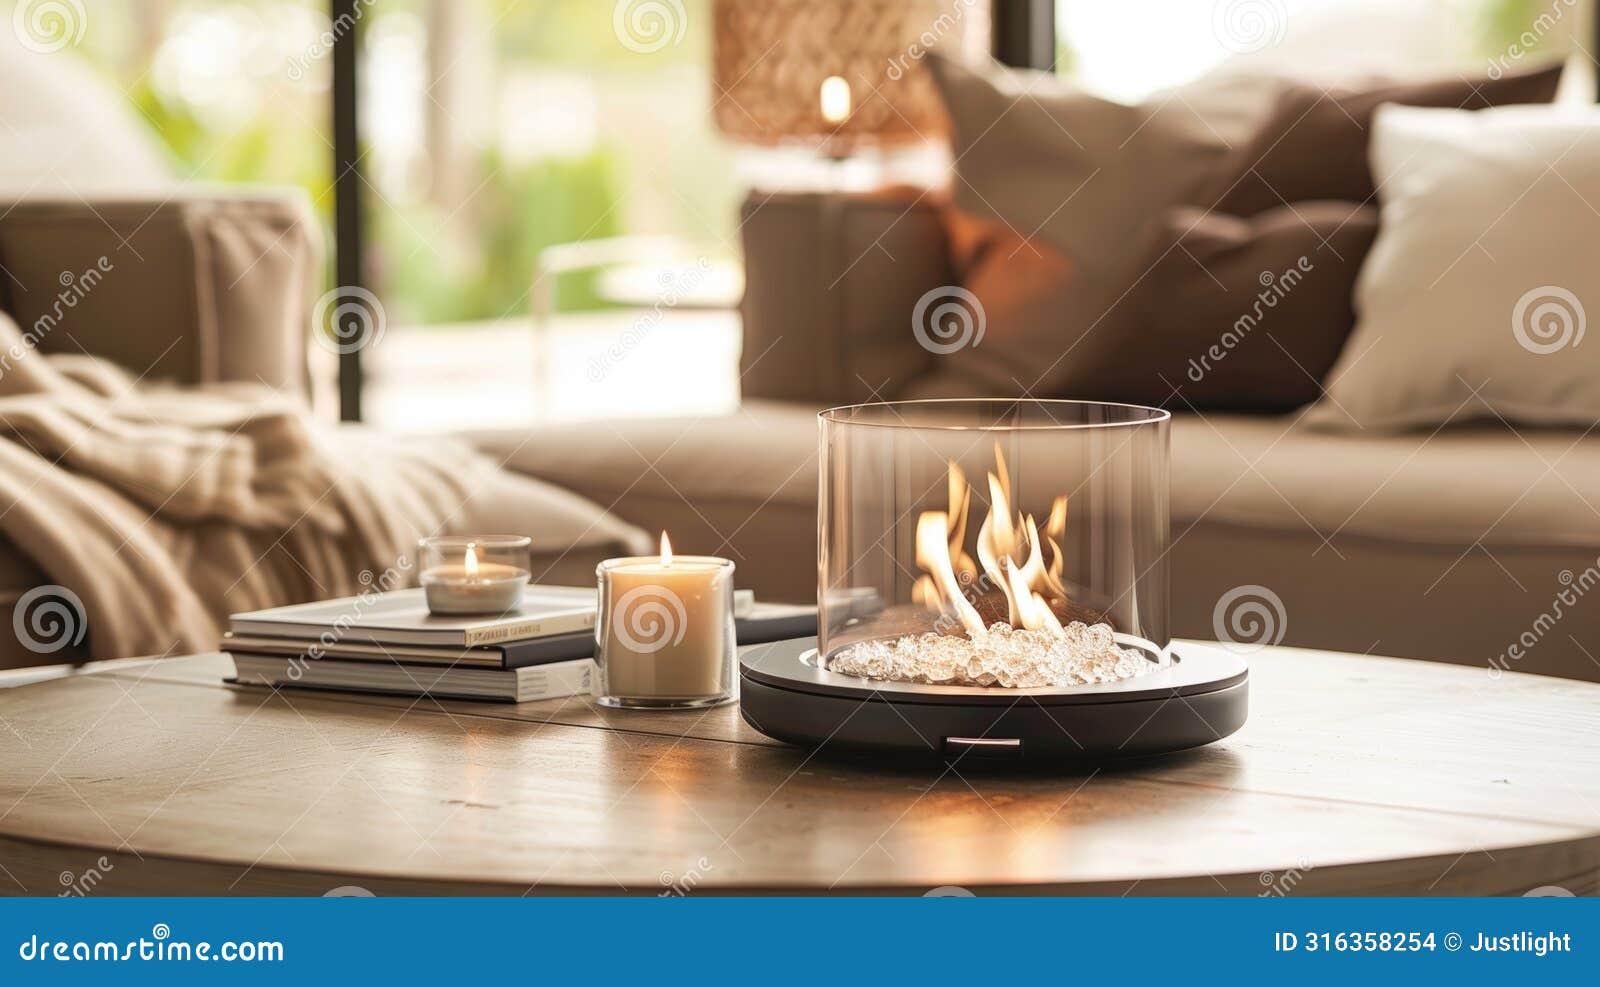 resting atop a sy base this tabletop fireplace is both practical and elegant. 2d flat cartoon